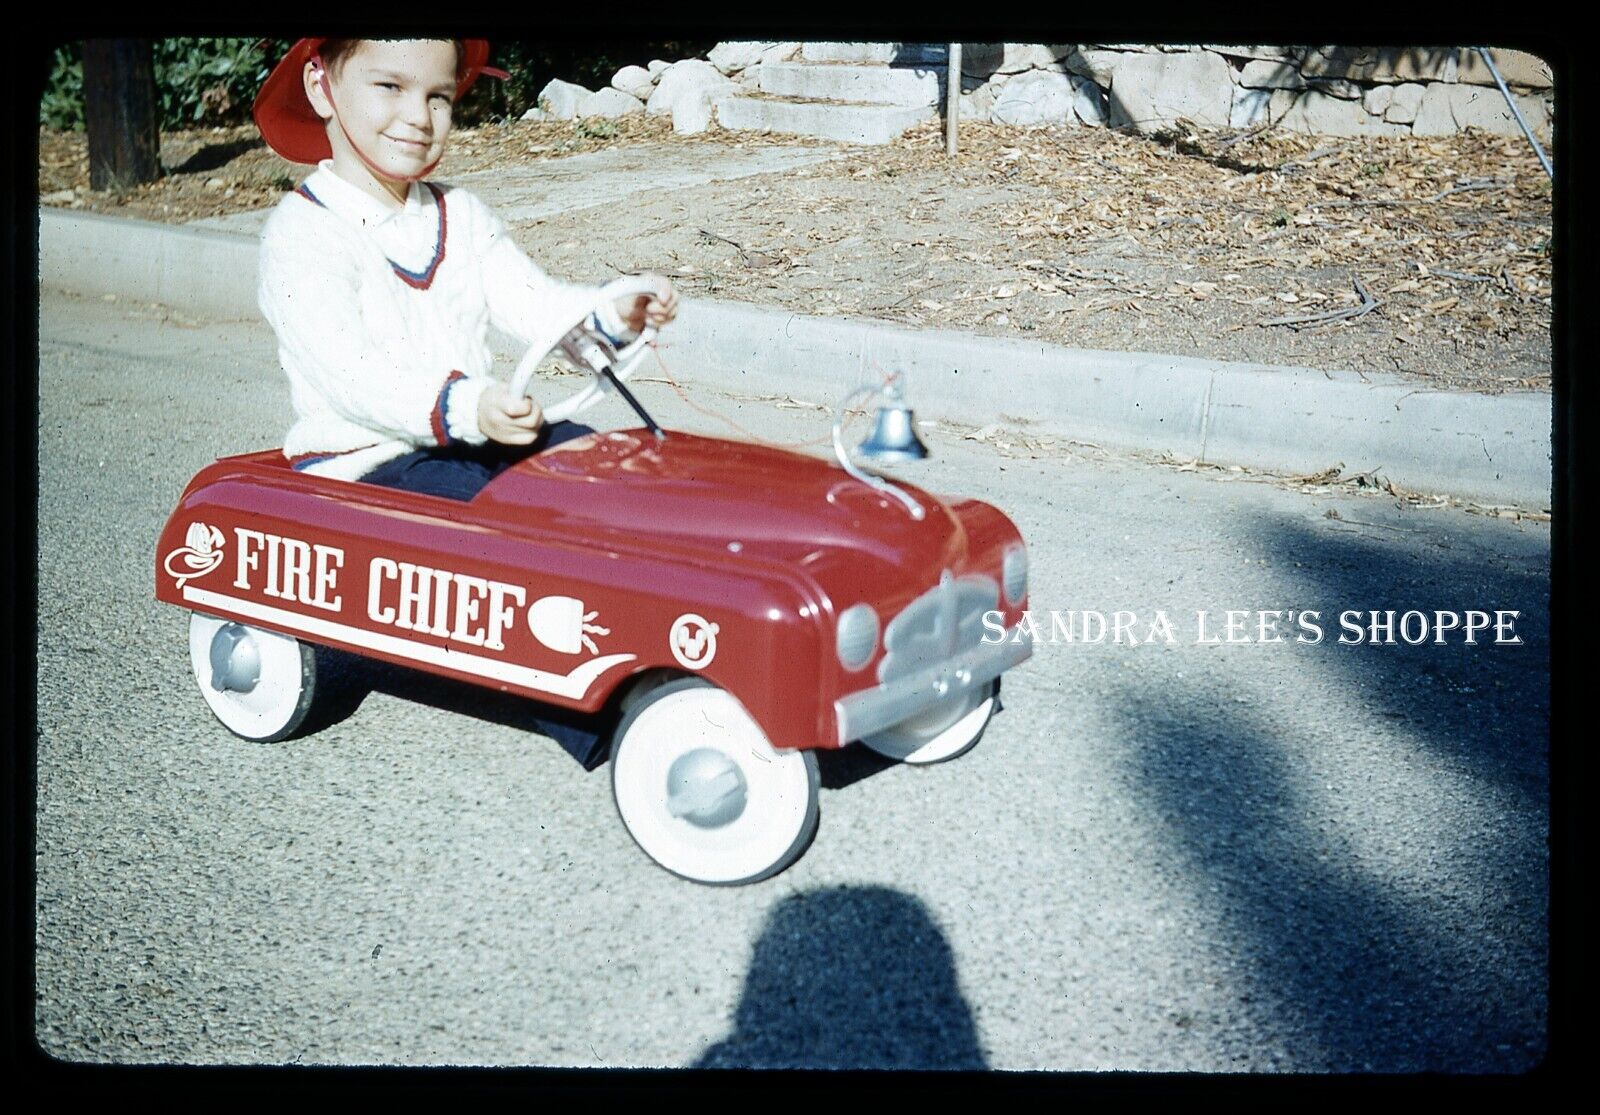 #775 Slide 1959 Boy Riding Red Fire Chief Pedal Toy Car with Fireman Helmet